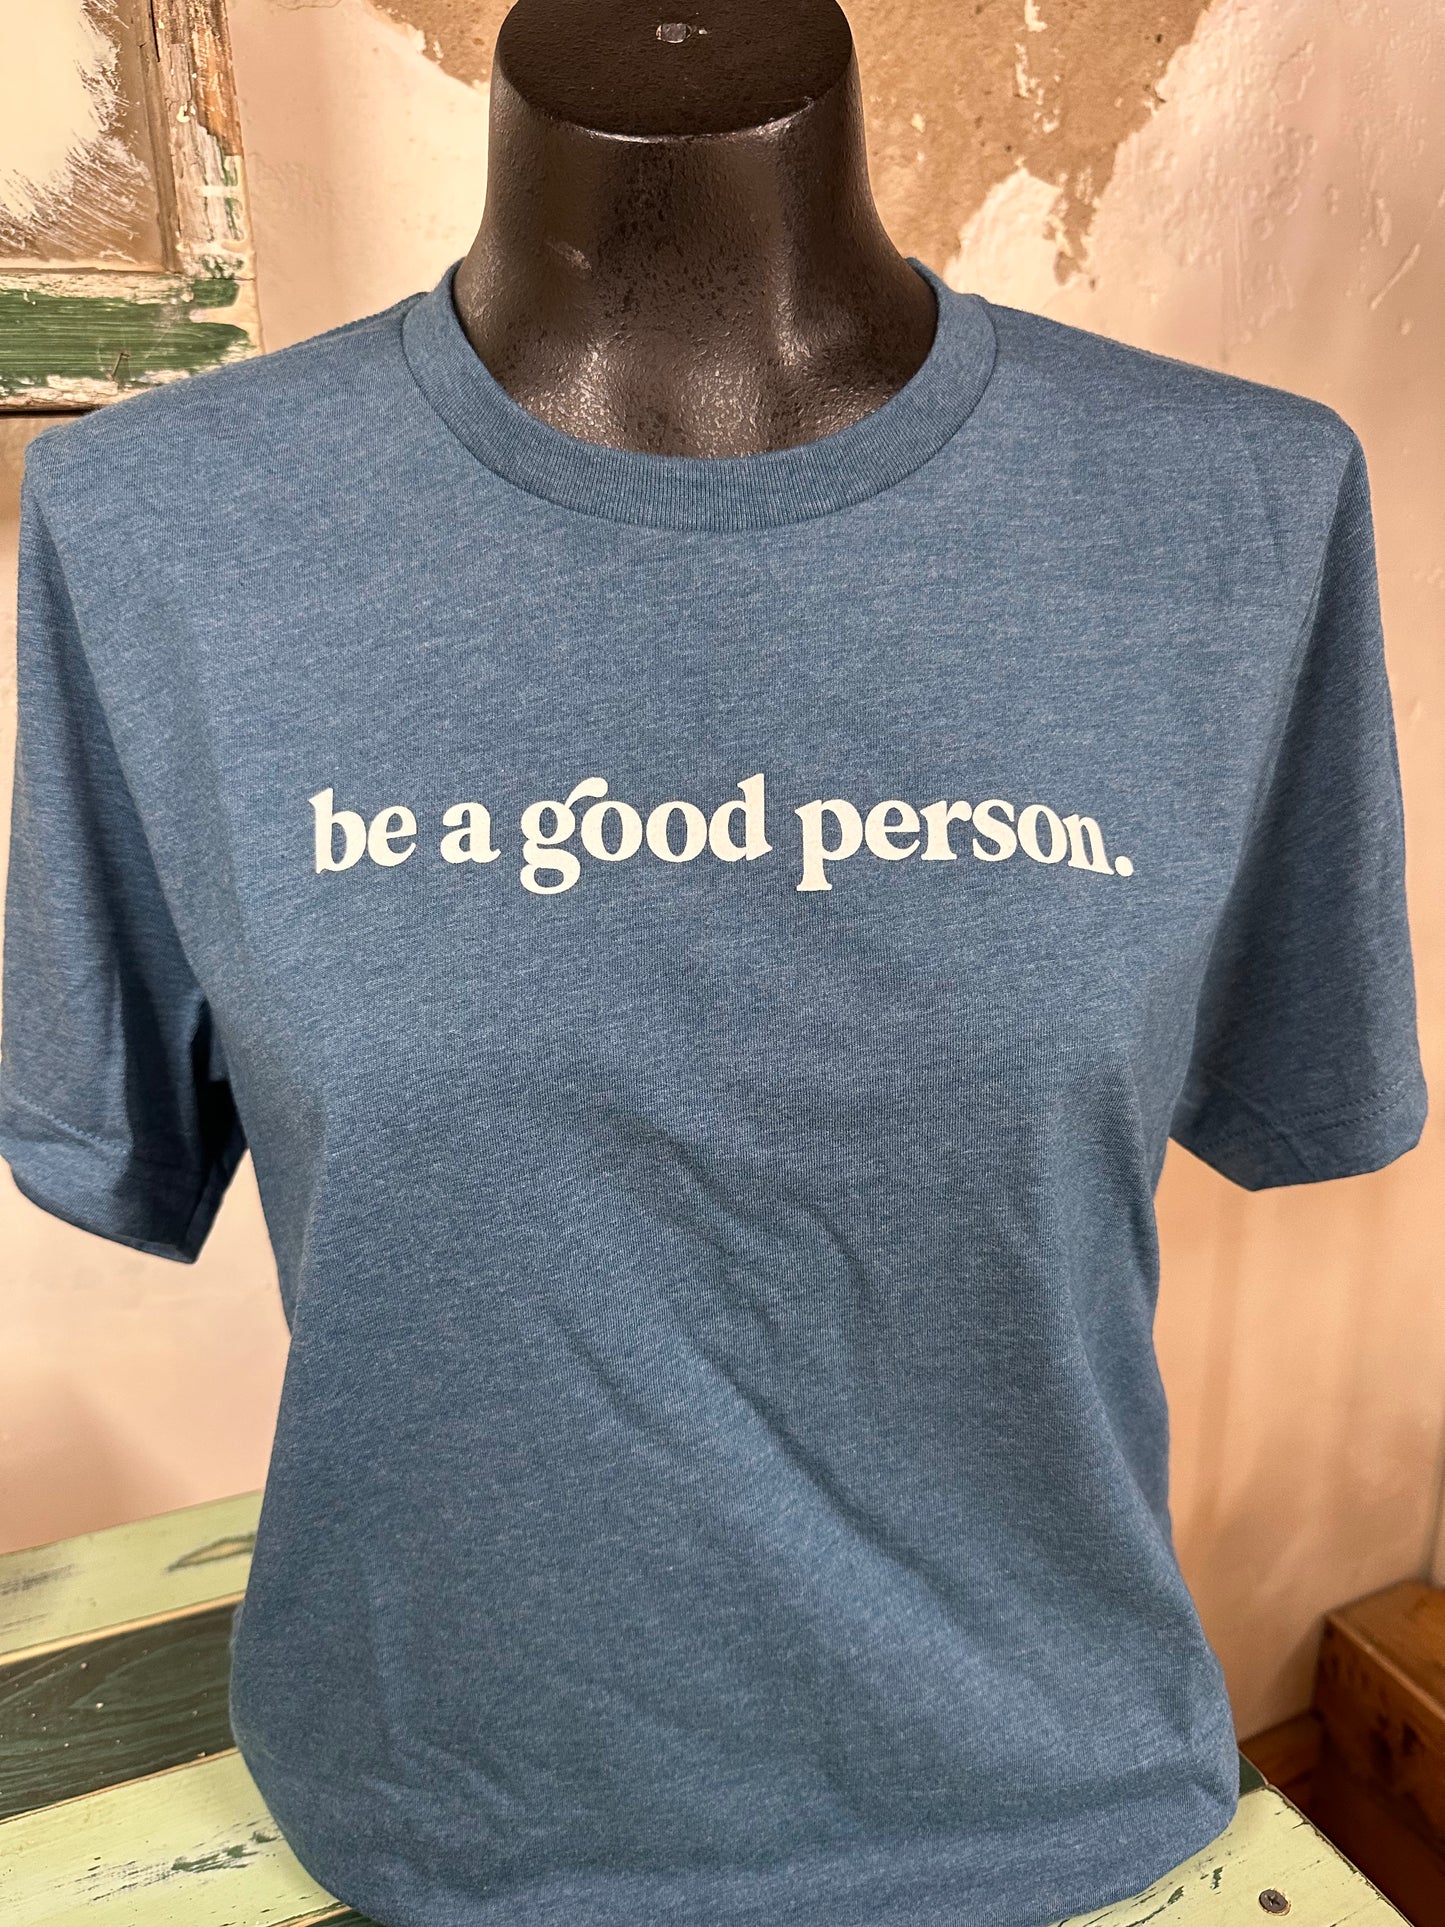 be a good person.